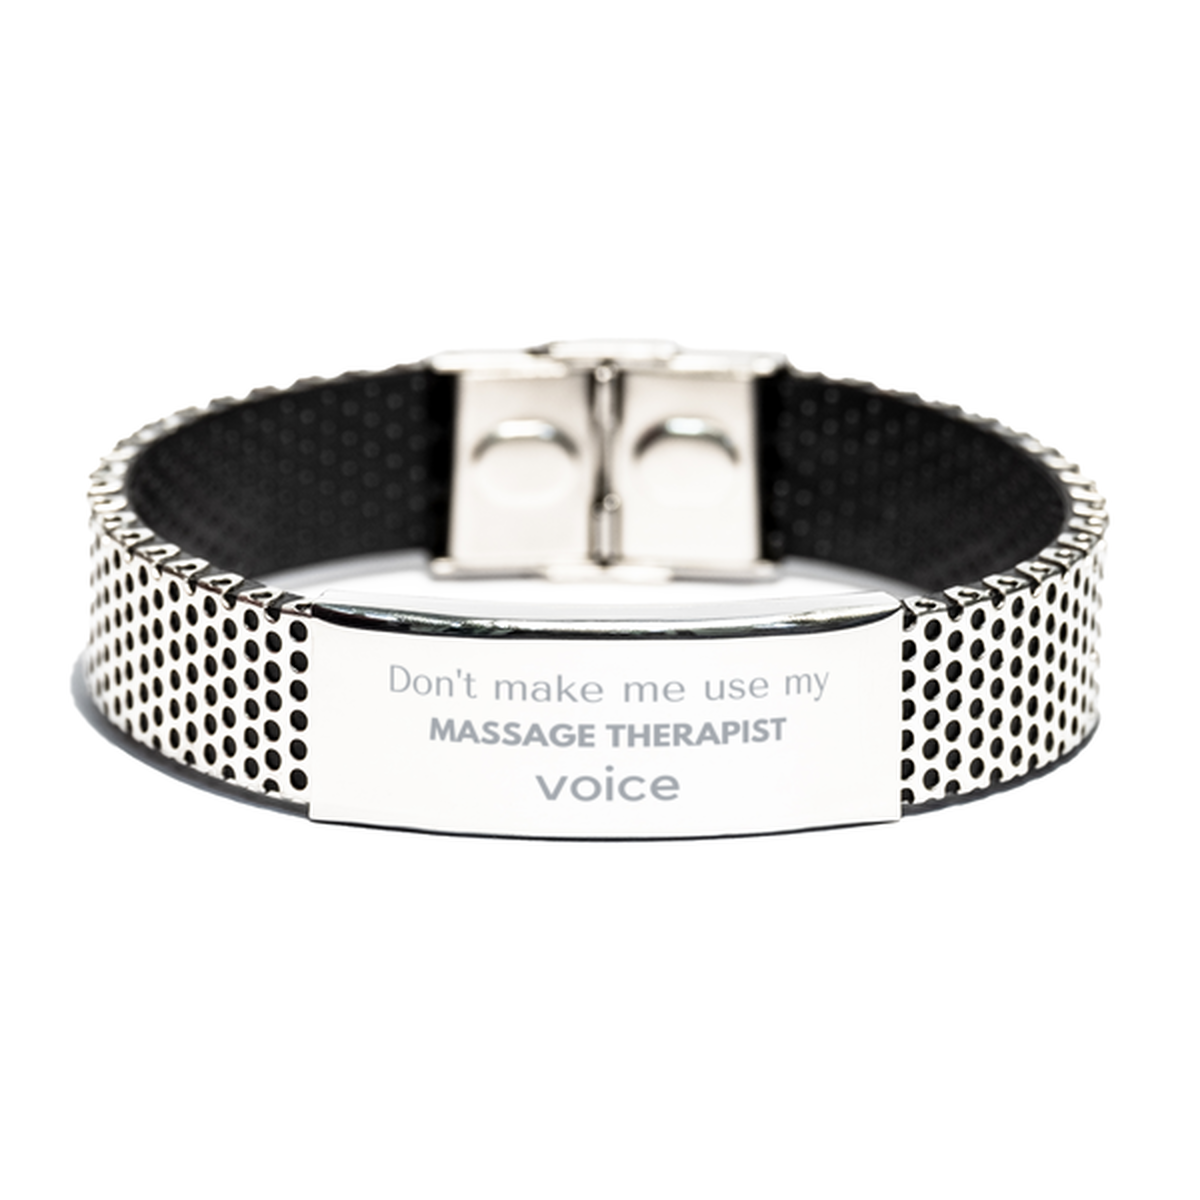 Don't make me use my Massage Therapist voice, Sarcasm Massage Therapist Gifts, Christmas Massage Therapist Stainless Steel Bracelet Birthday Unique Gifts For Massage Therapist Coworkers, Men, Women, Colleague, Friends